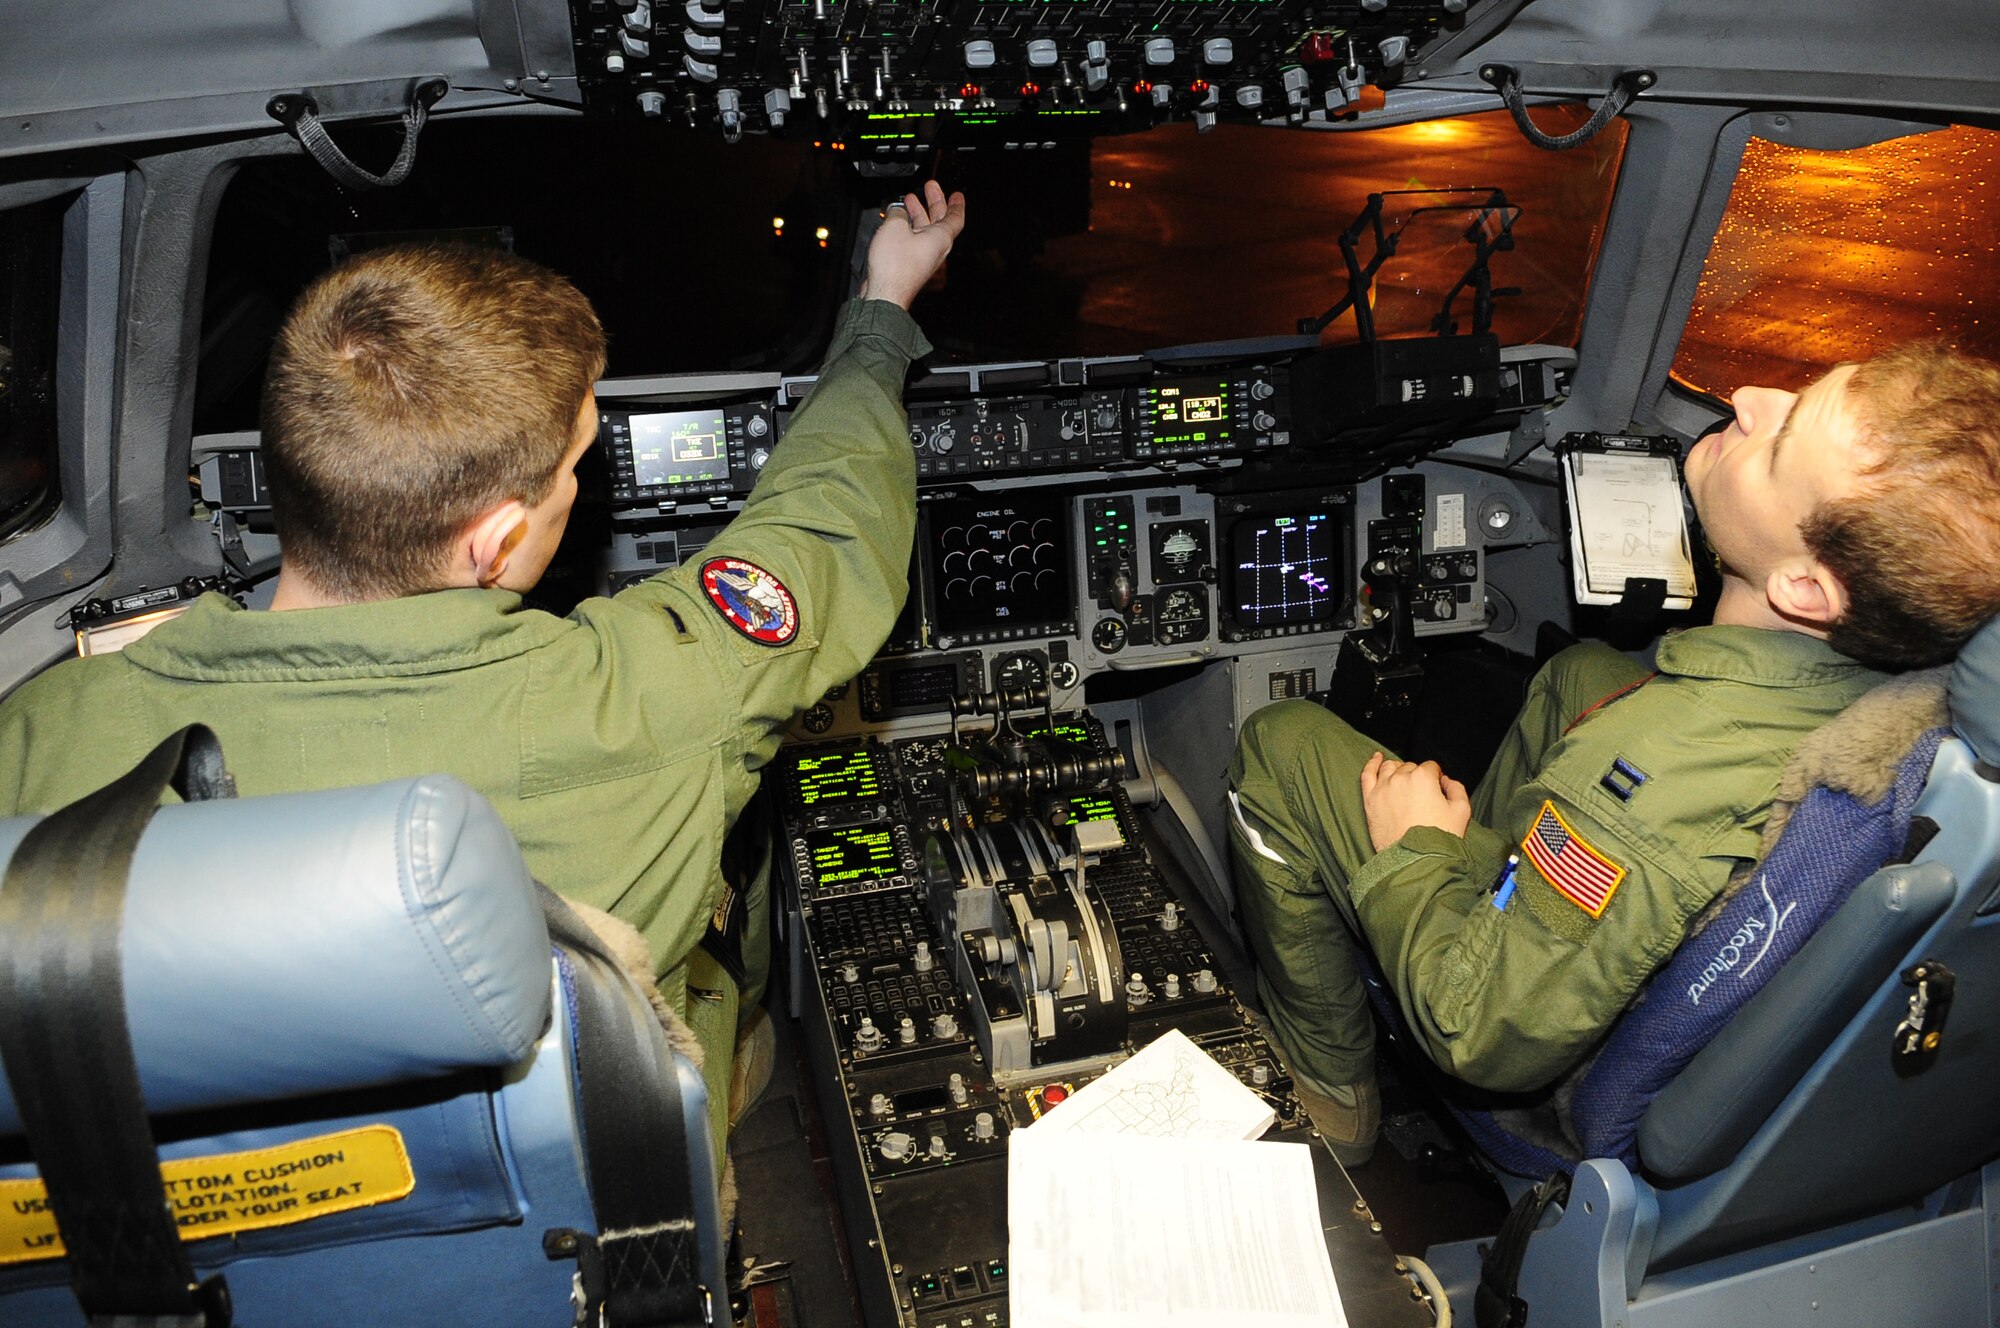 1st Lt. Nathan Moseley, co-pilot, and Capt. Anthony Cappel, mission commander, left, both 4th Airlift Squadron, conduct pre-flight checks on the flight deck before take-off early Sunday morning for Langley Air Force Base, Va. Two additional C-17s were dispatched Sunday to Pope AFB, N.C. and Charleston AFB, S.C., respectively, to pick up critical supplies and deliver them to Haiti; a fourth C-17 departed Jan. 18 for Pope. (Courtesy photo)